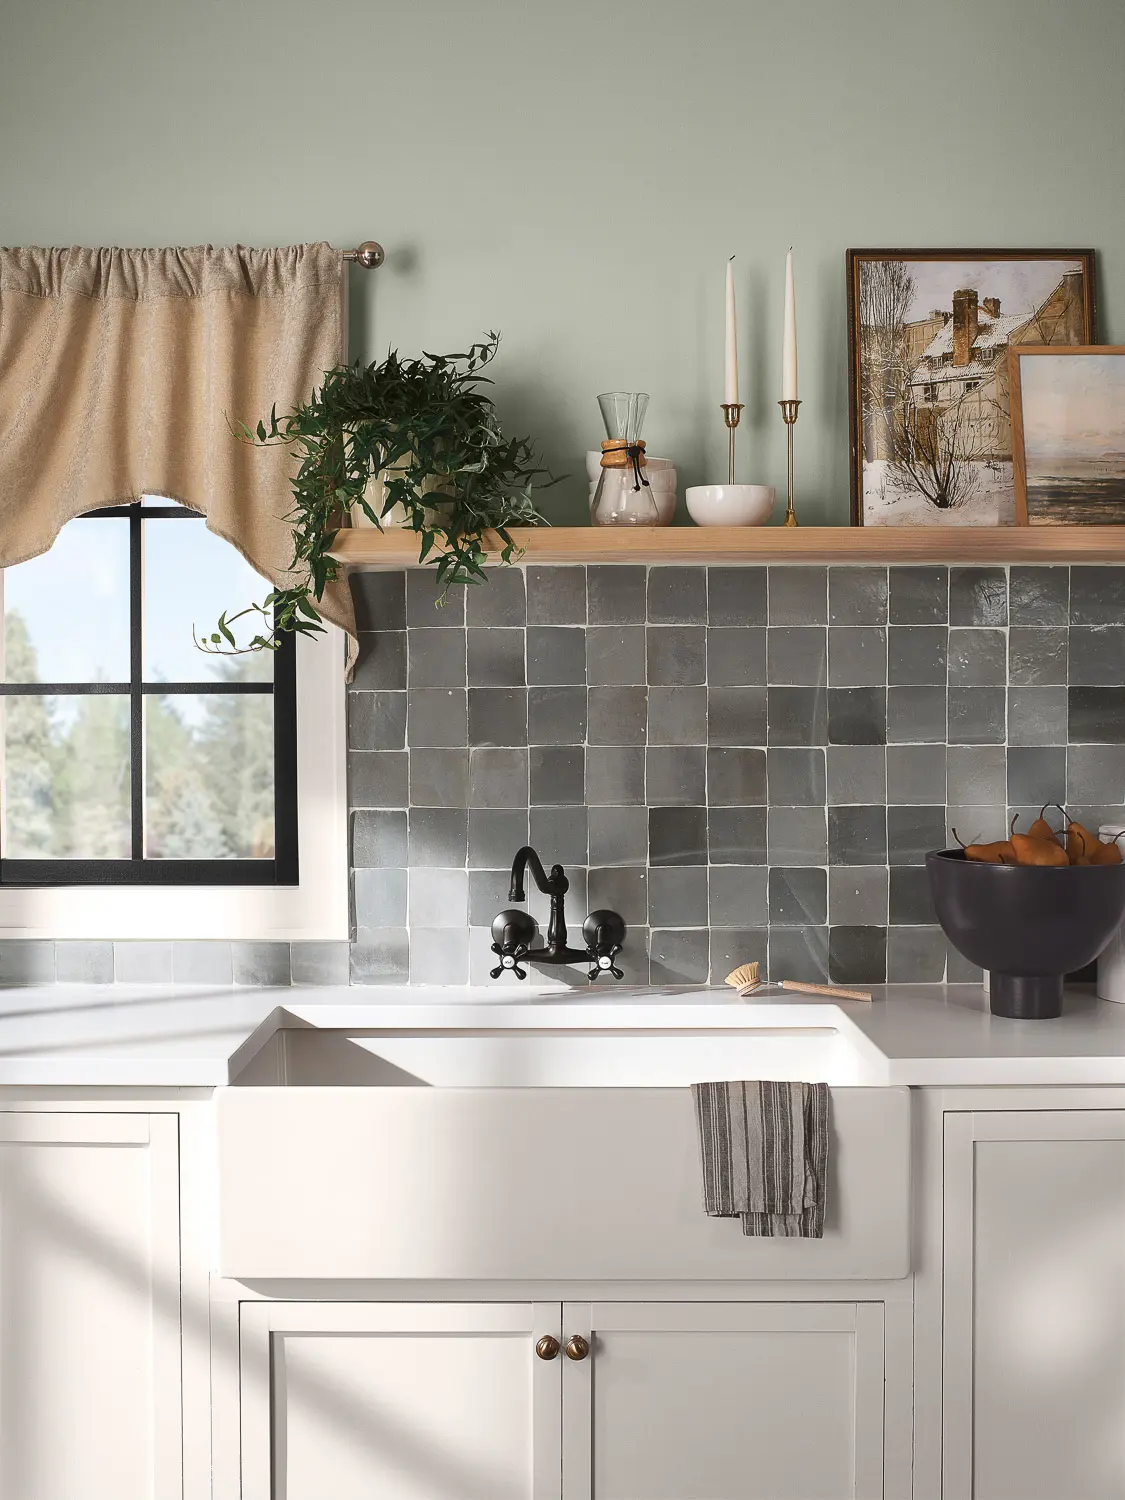 European Country Kitchen with great tile and sink